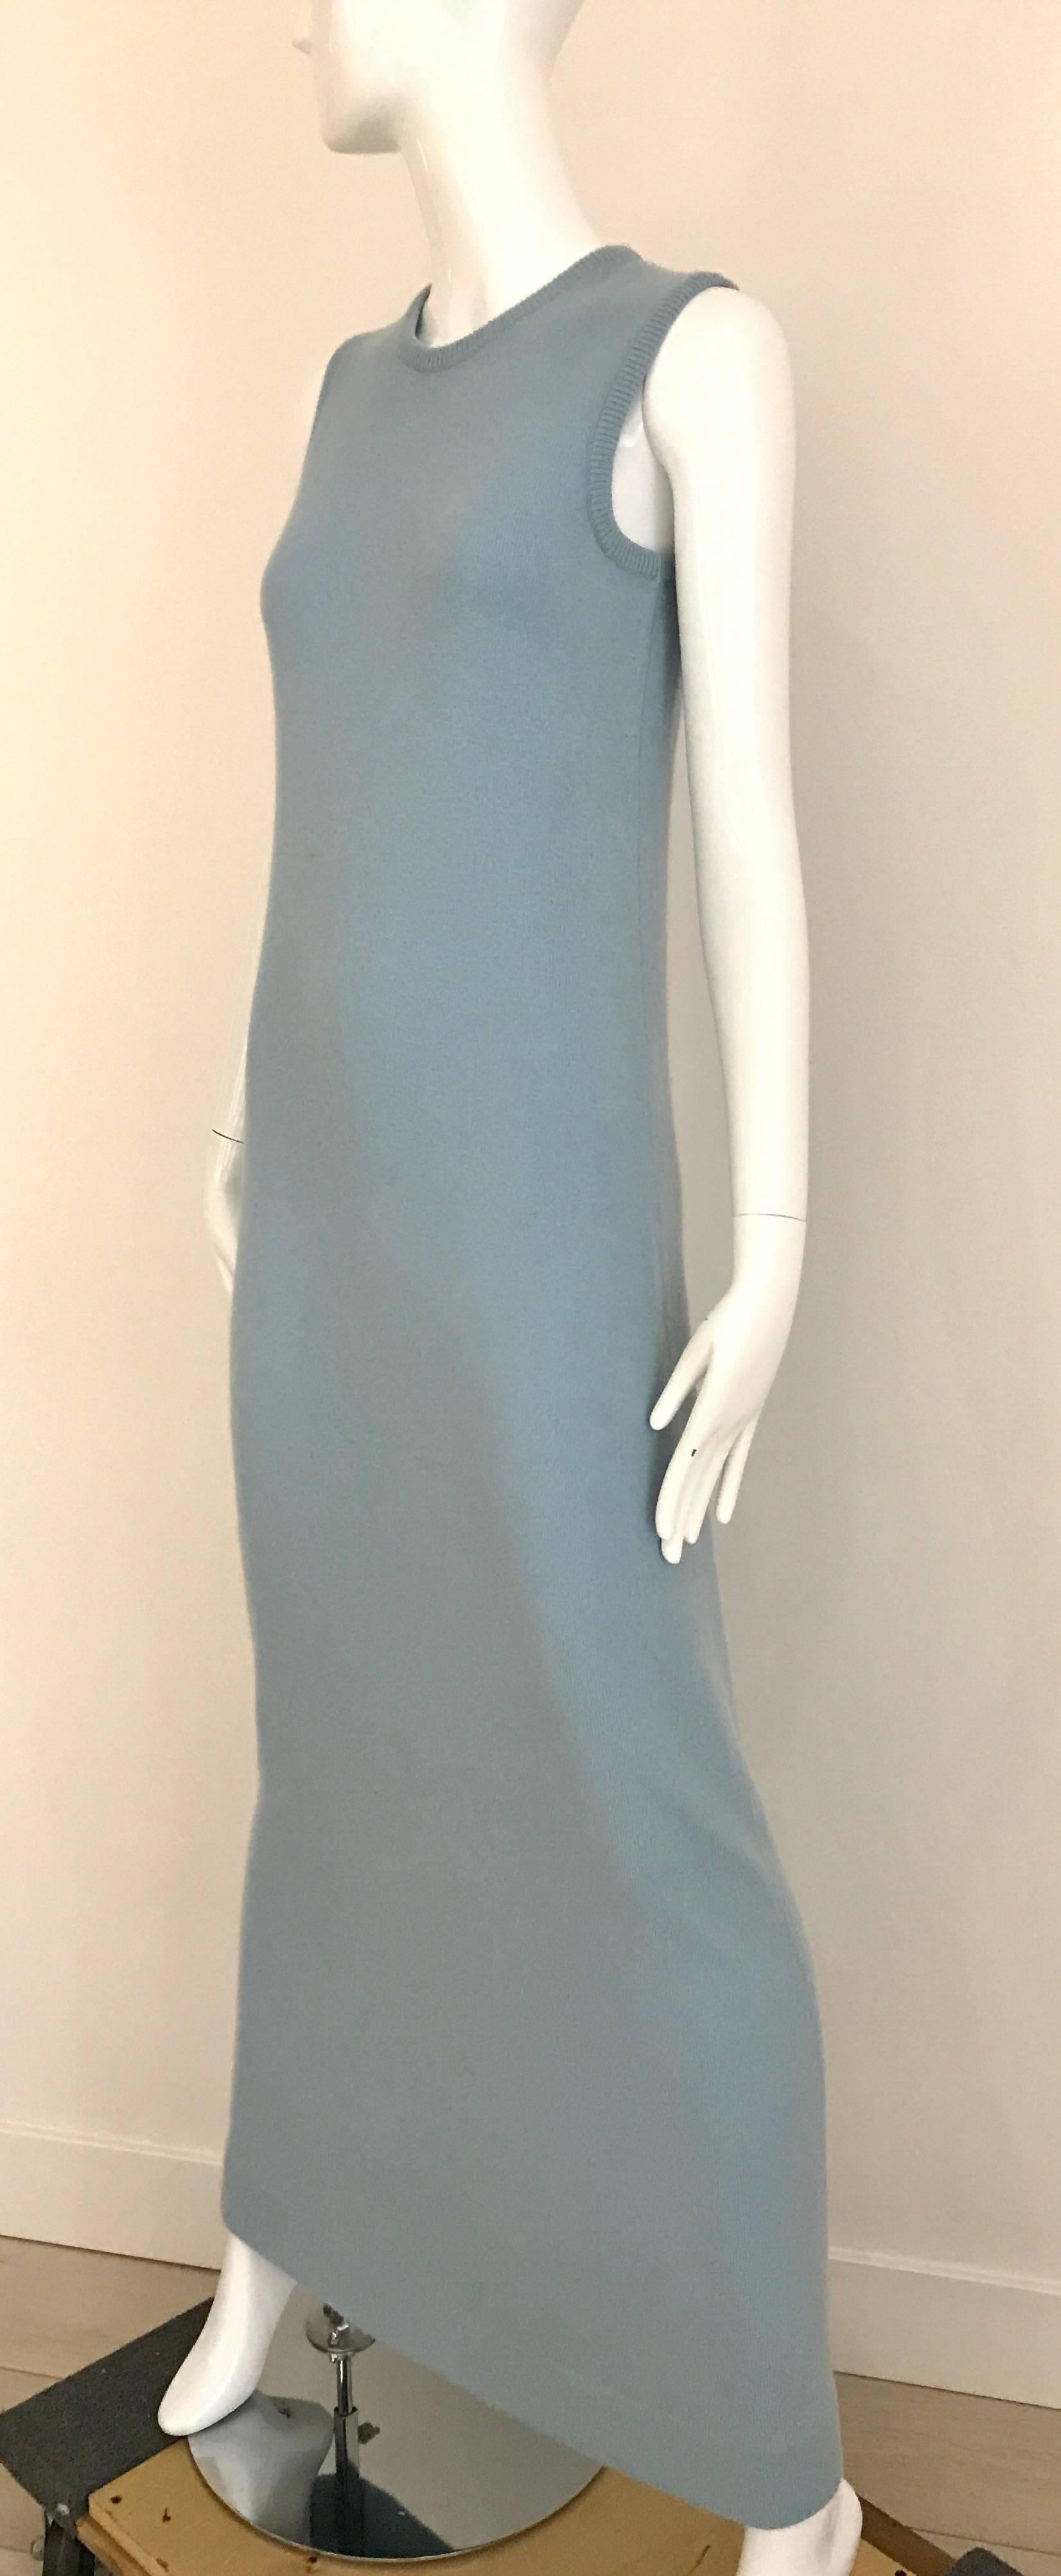 Gray 1970s HALSTON Baby Blue Sleeveless Cashmere Vintage Sweater 70s Dress For Sale